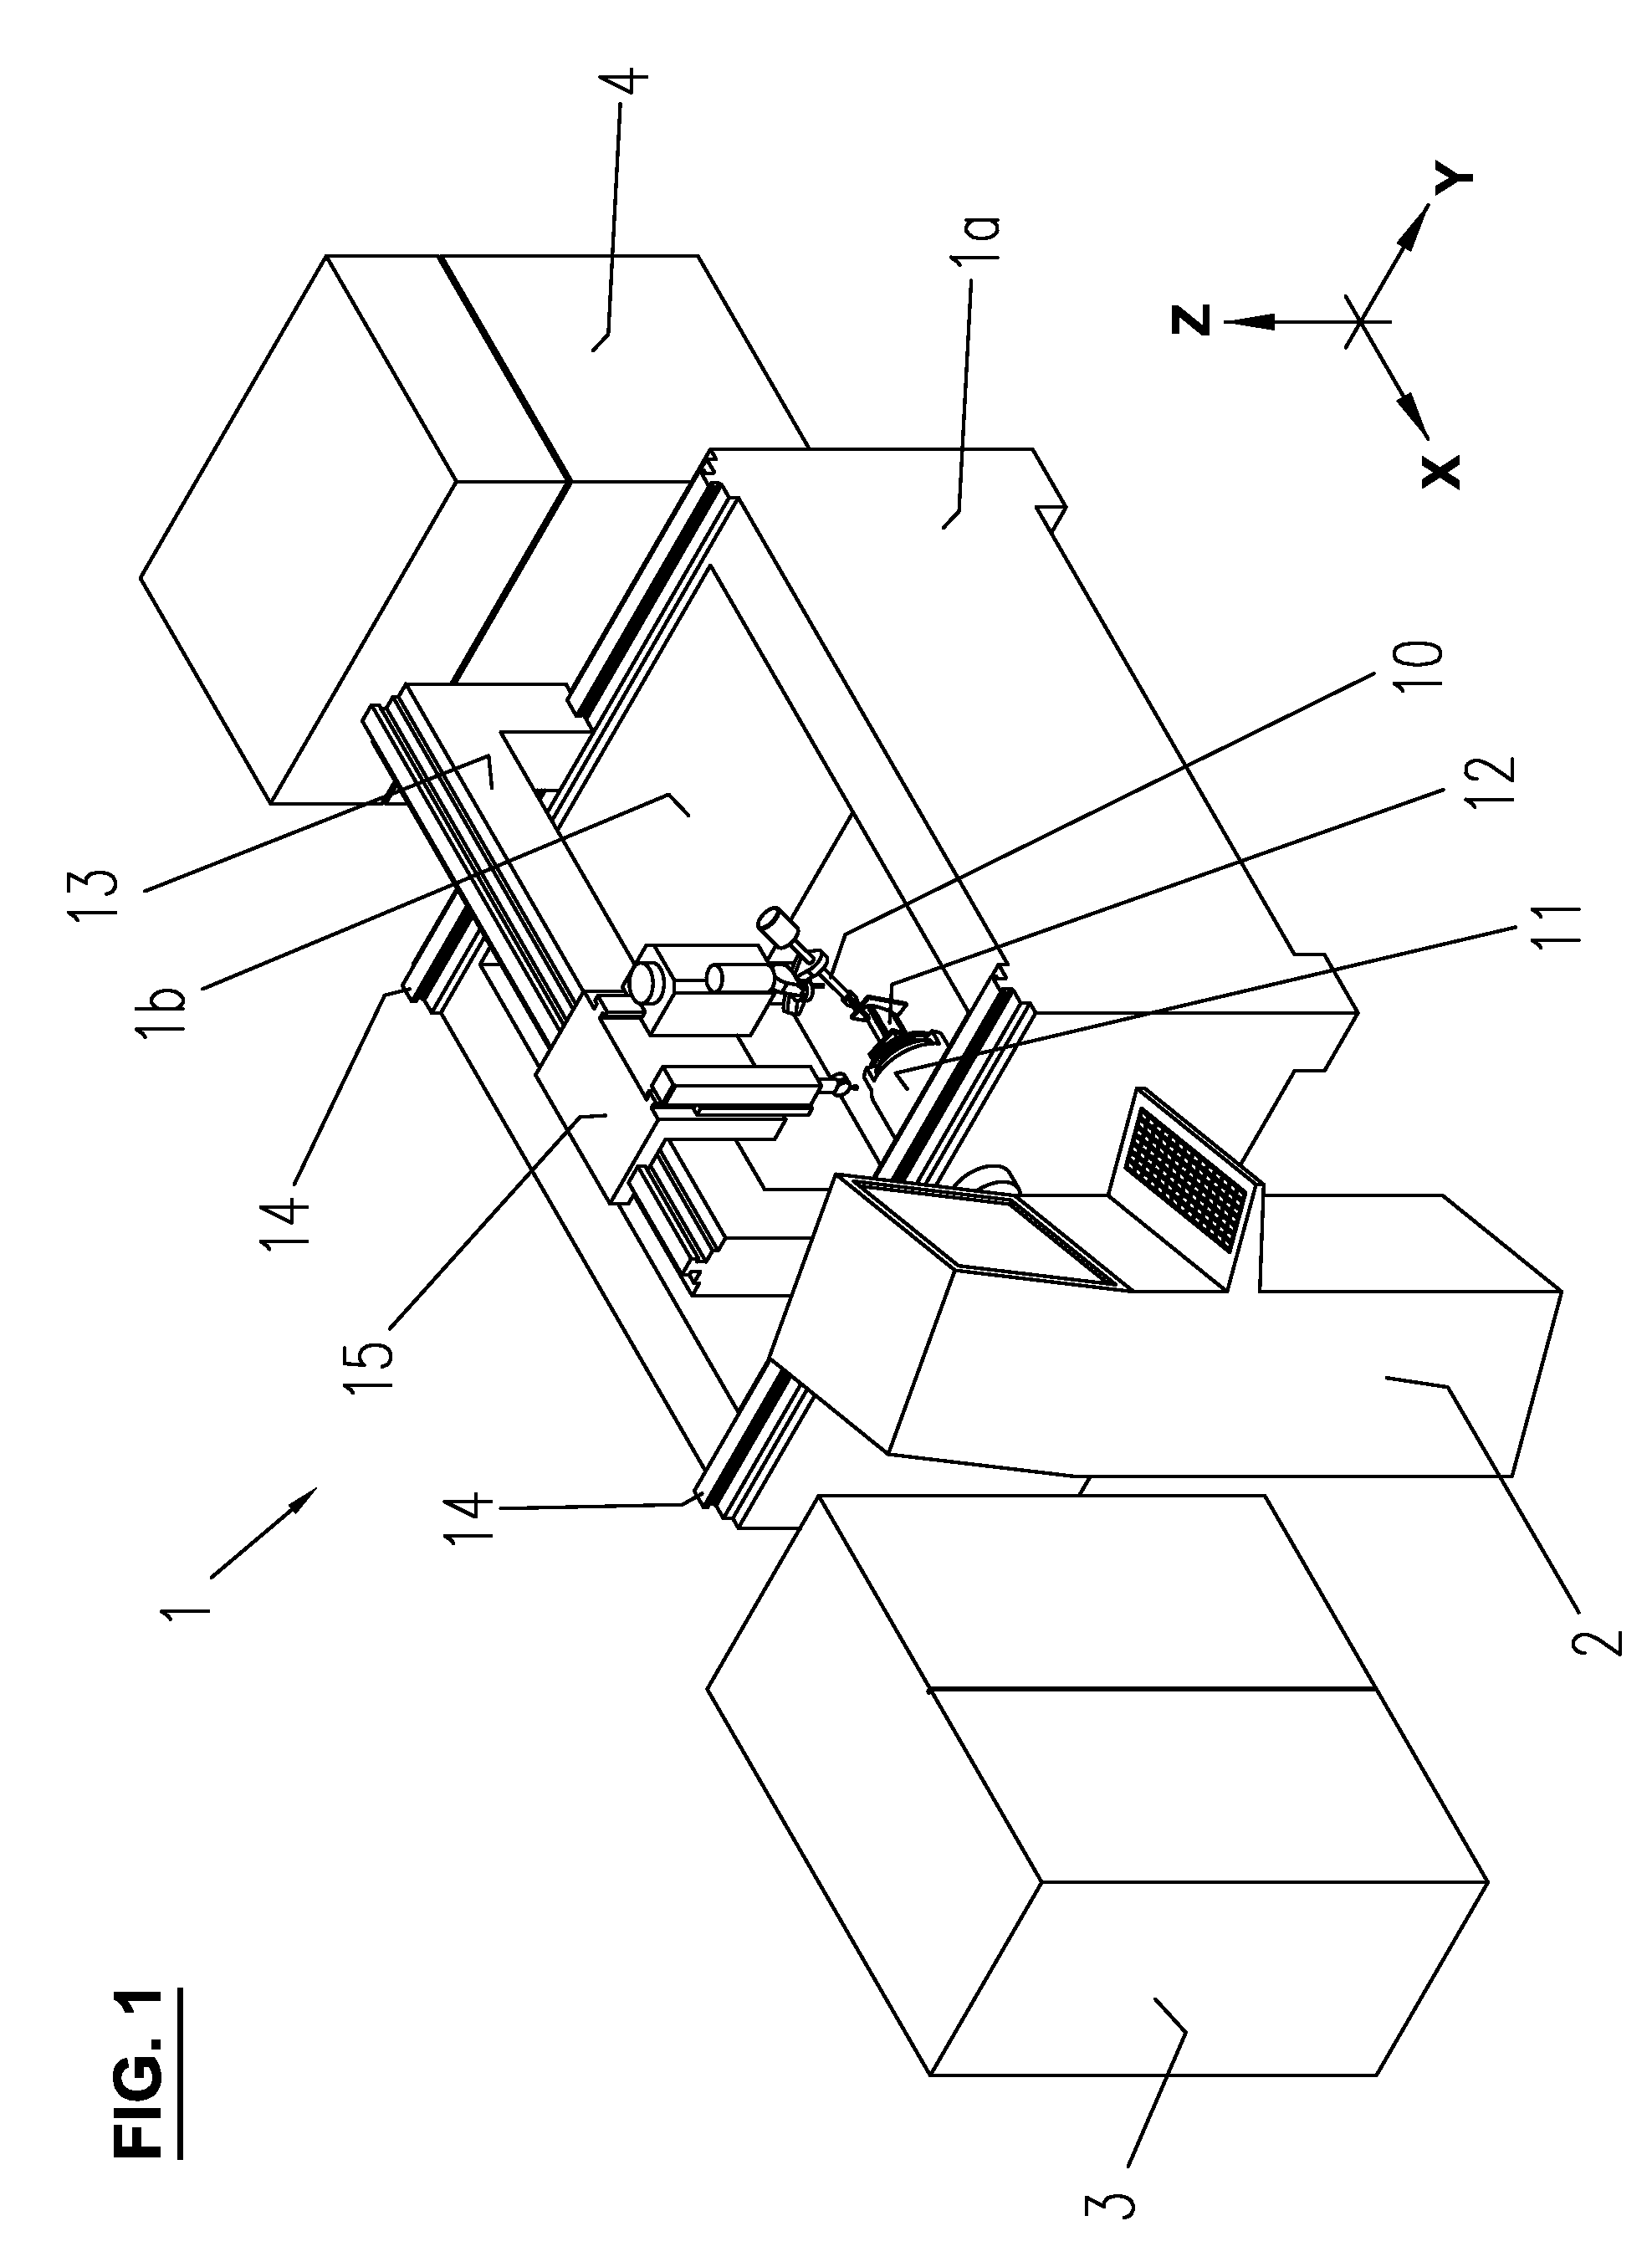 Method for drilling at least one hole into a workpiece